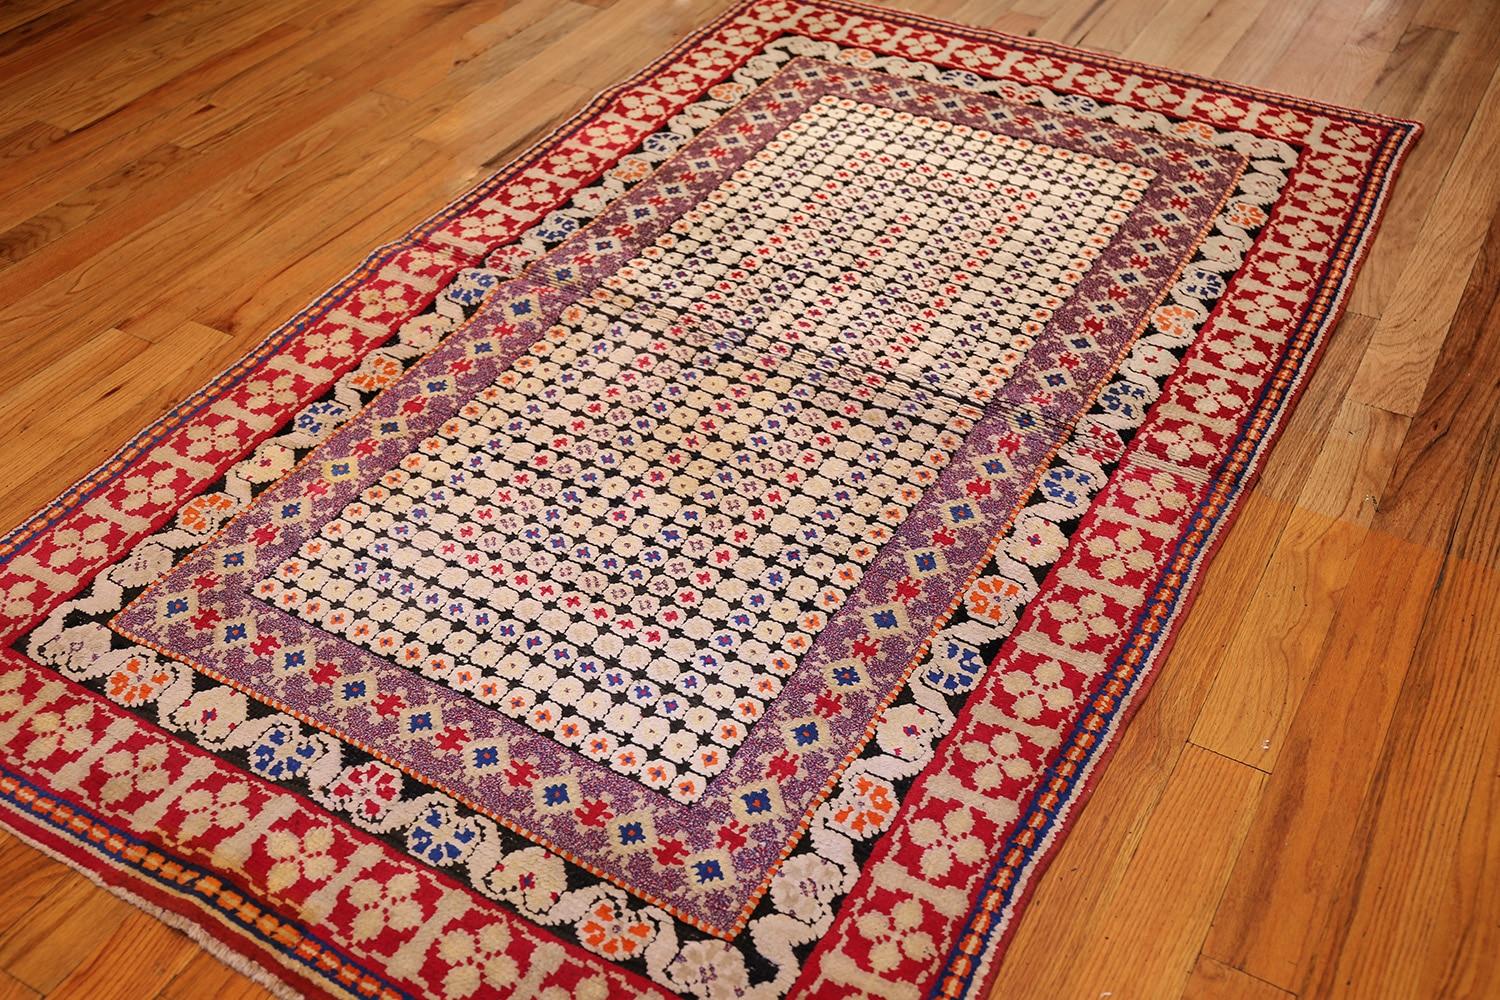 Antique Ukrainian rug, Ukraine, circa turn of the 20th century. Size: 4 ft. x 6 ft. 9 in (1.22 m x 2.06 m)

This fetching antique Ukrainian rug features a slightly eccentric composition, which, while not completely unorthodox in its presentation, is